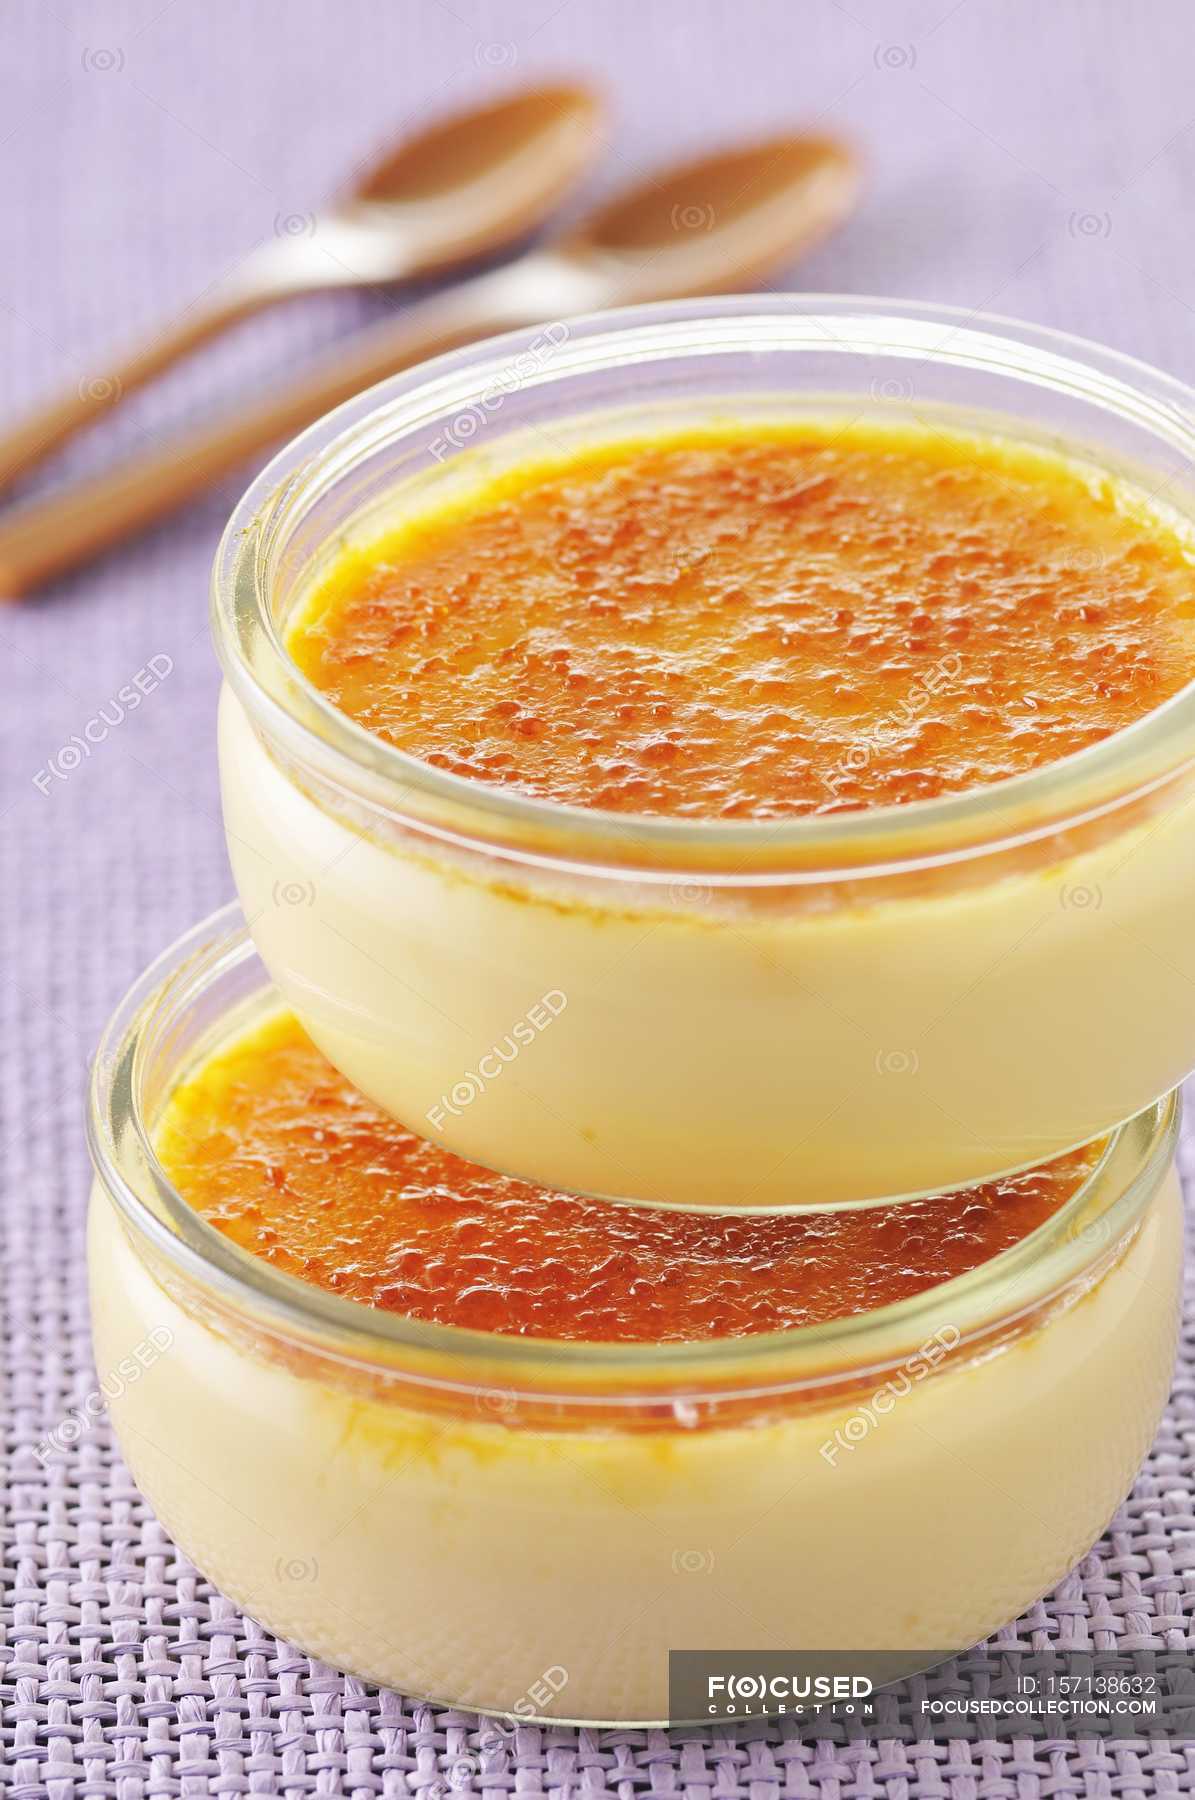 Oversætte Måling skade Closeup view of Creme brulee in two glass bowls — sweet, backdrop - Stock  Photo | #157138632